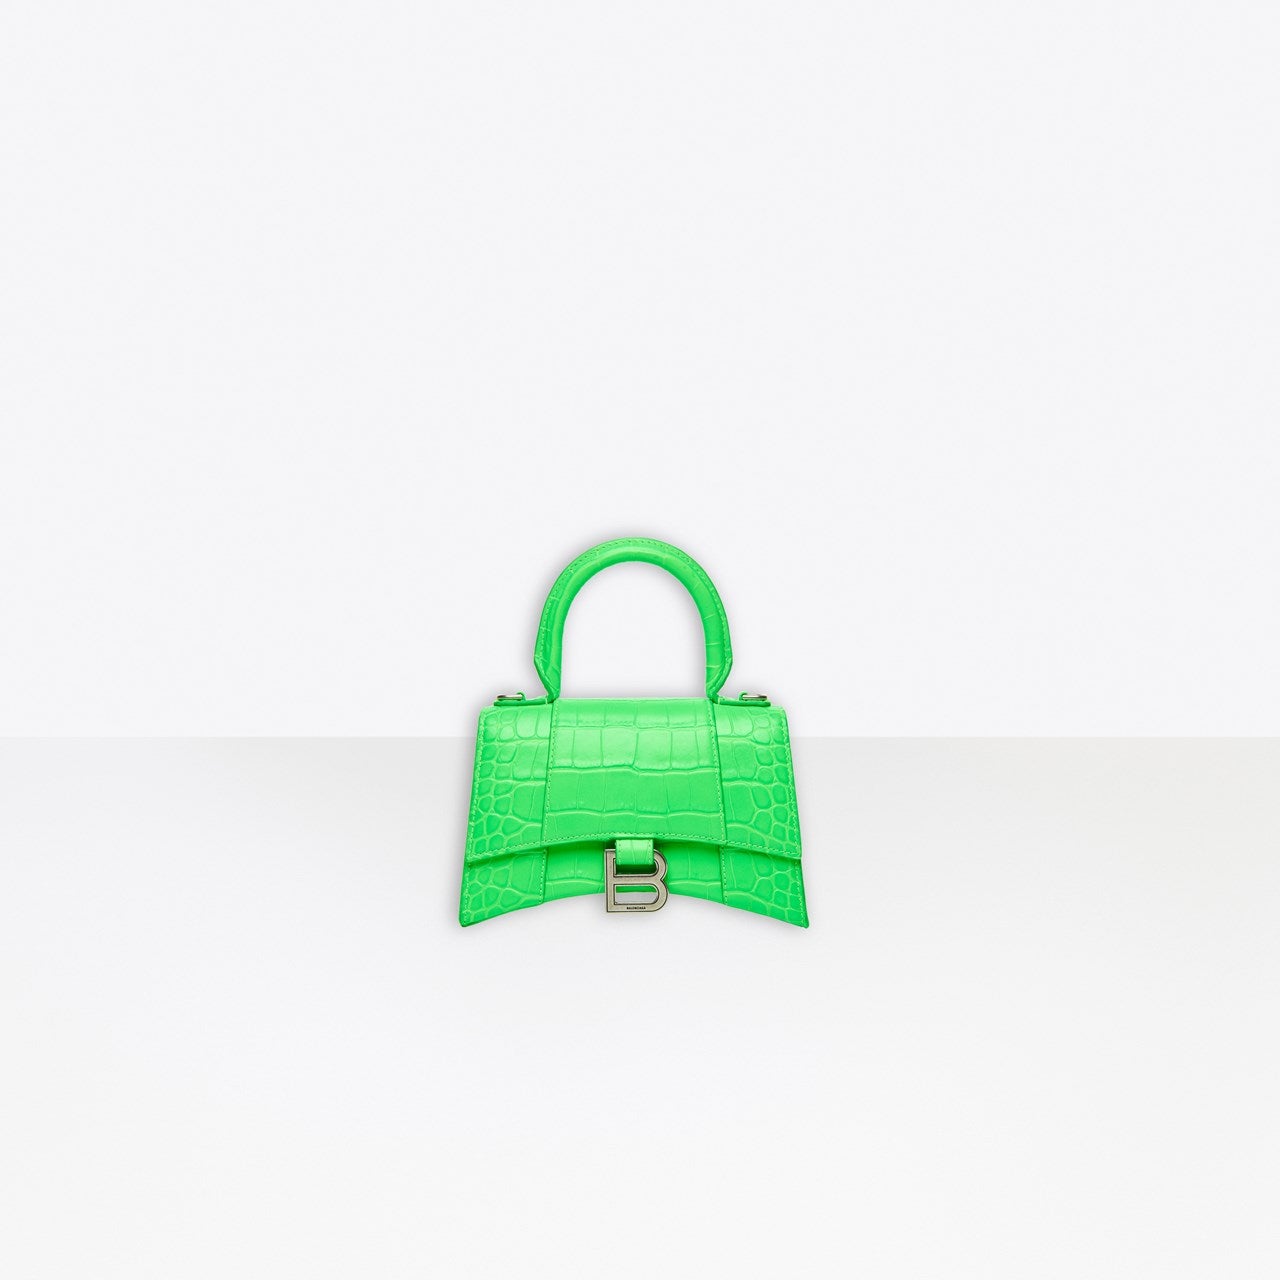 2021 Is The Year Of The Collectible Designer Handbag